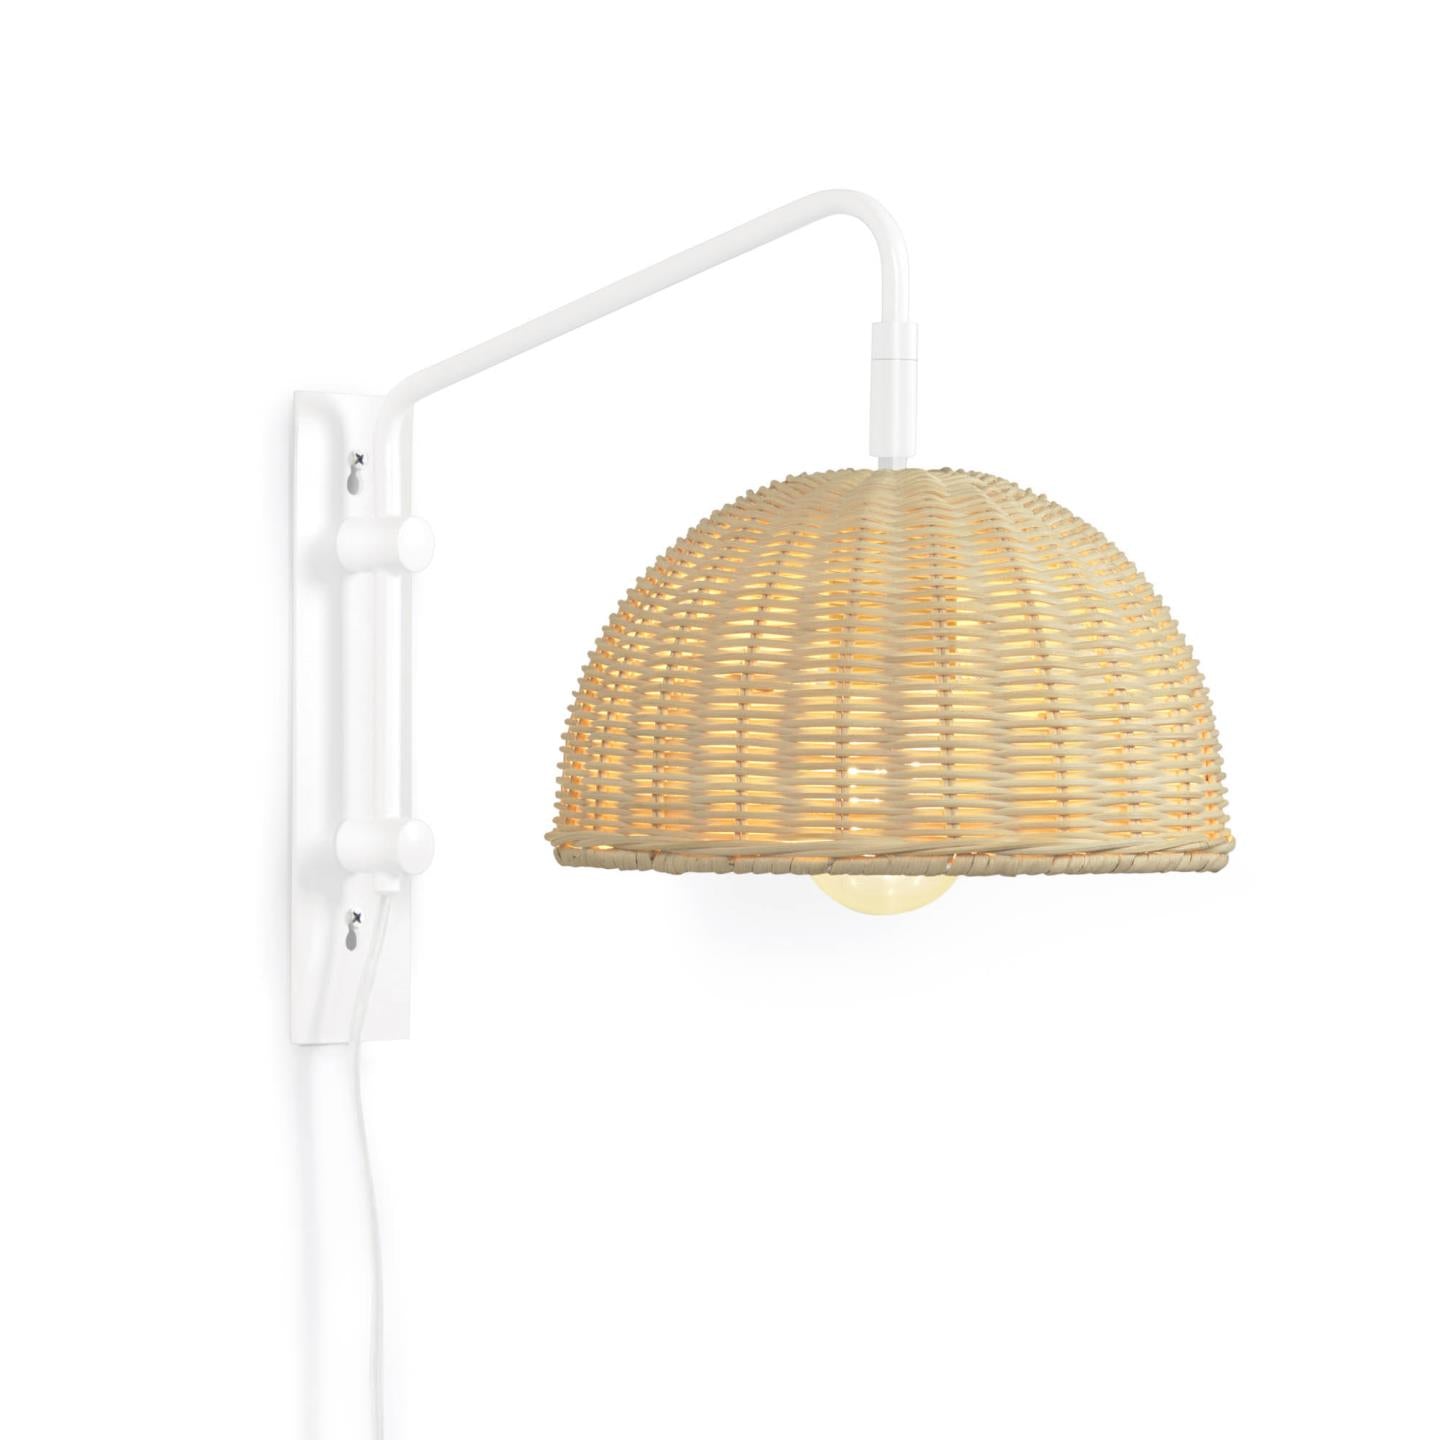 Damila wall light in metal with white finish and rattan with natural finish